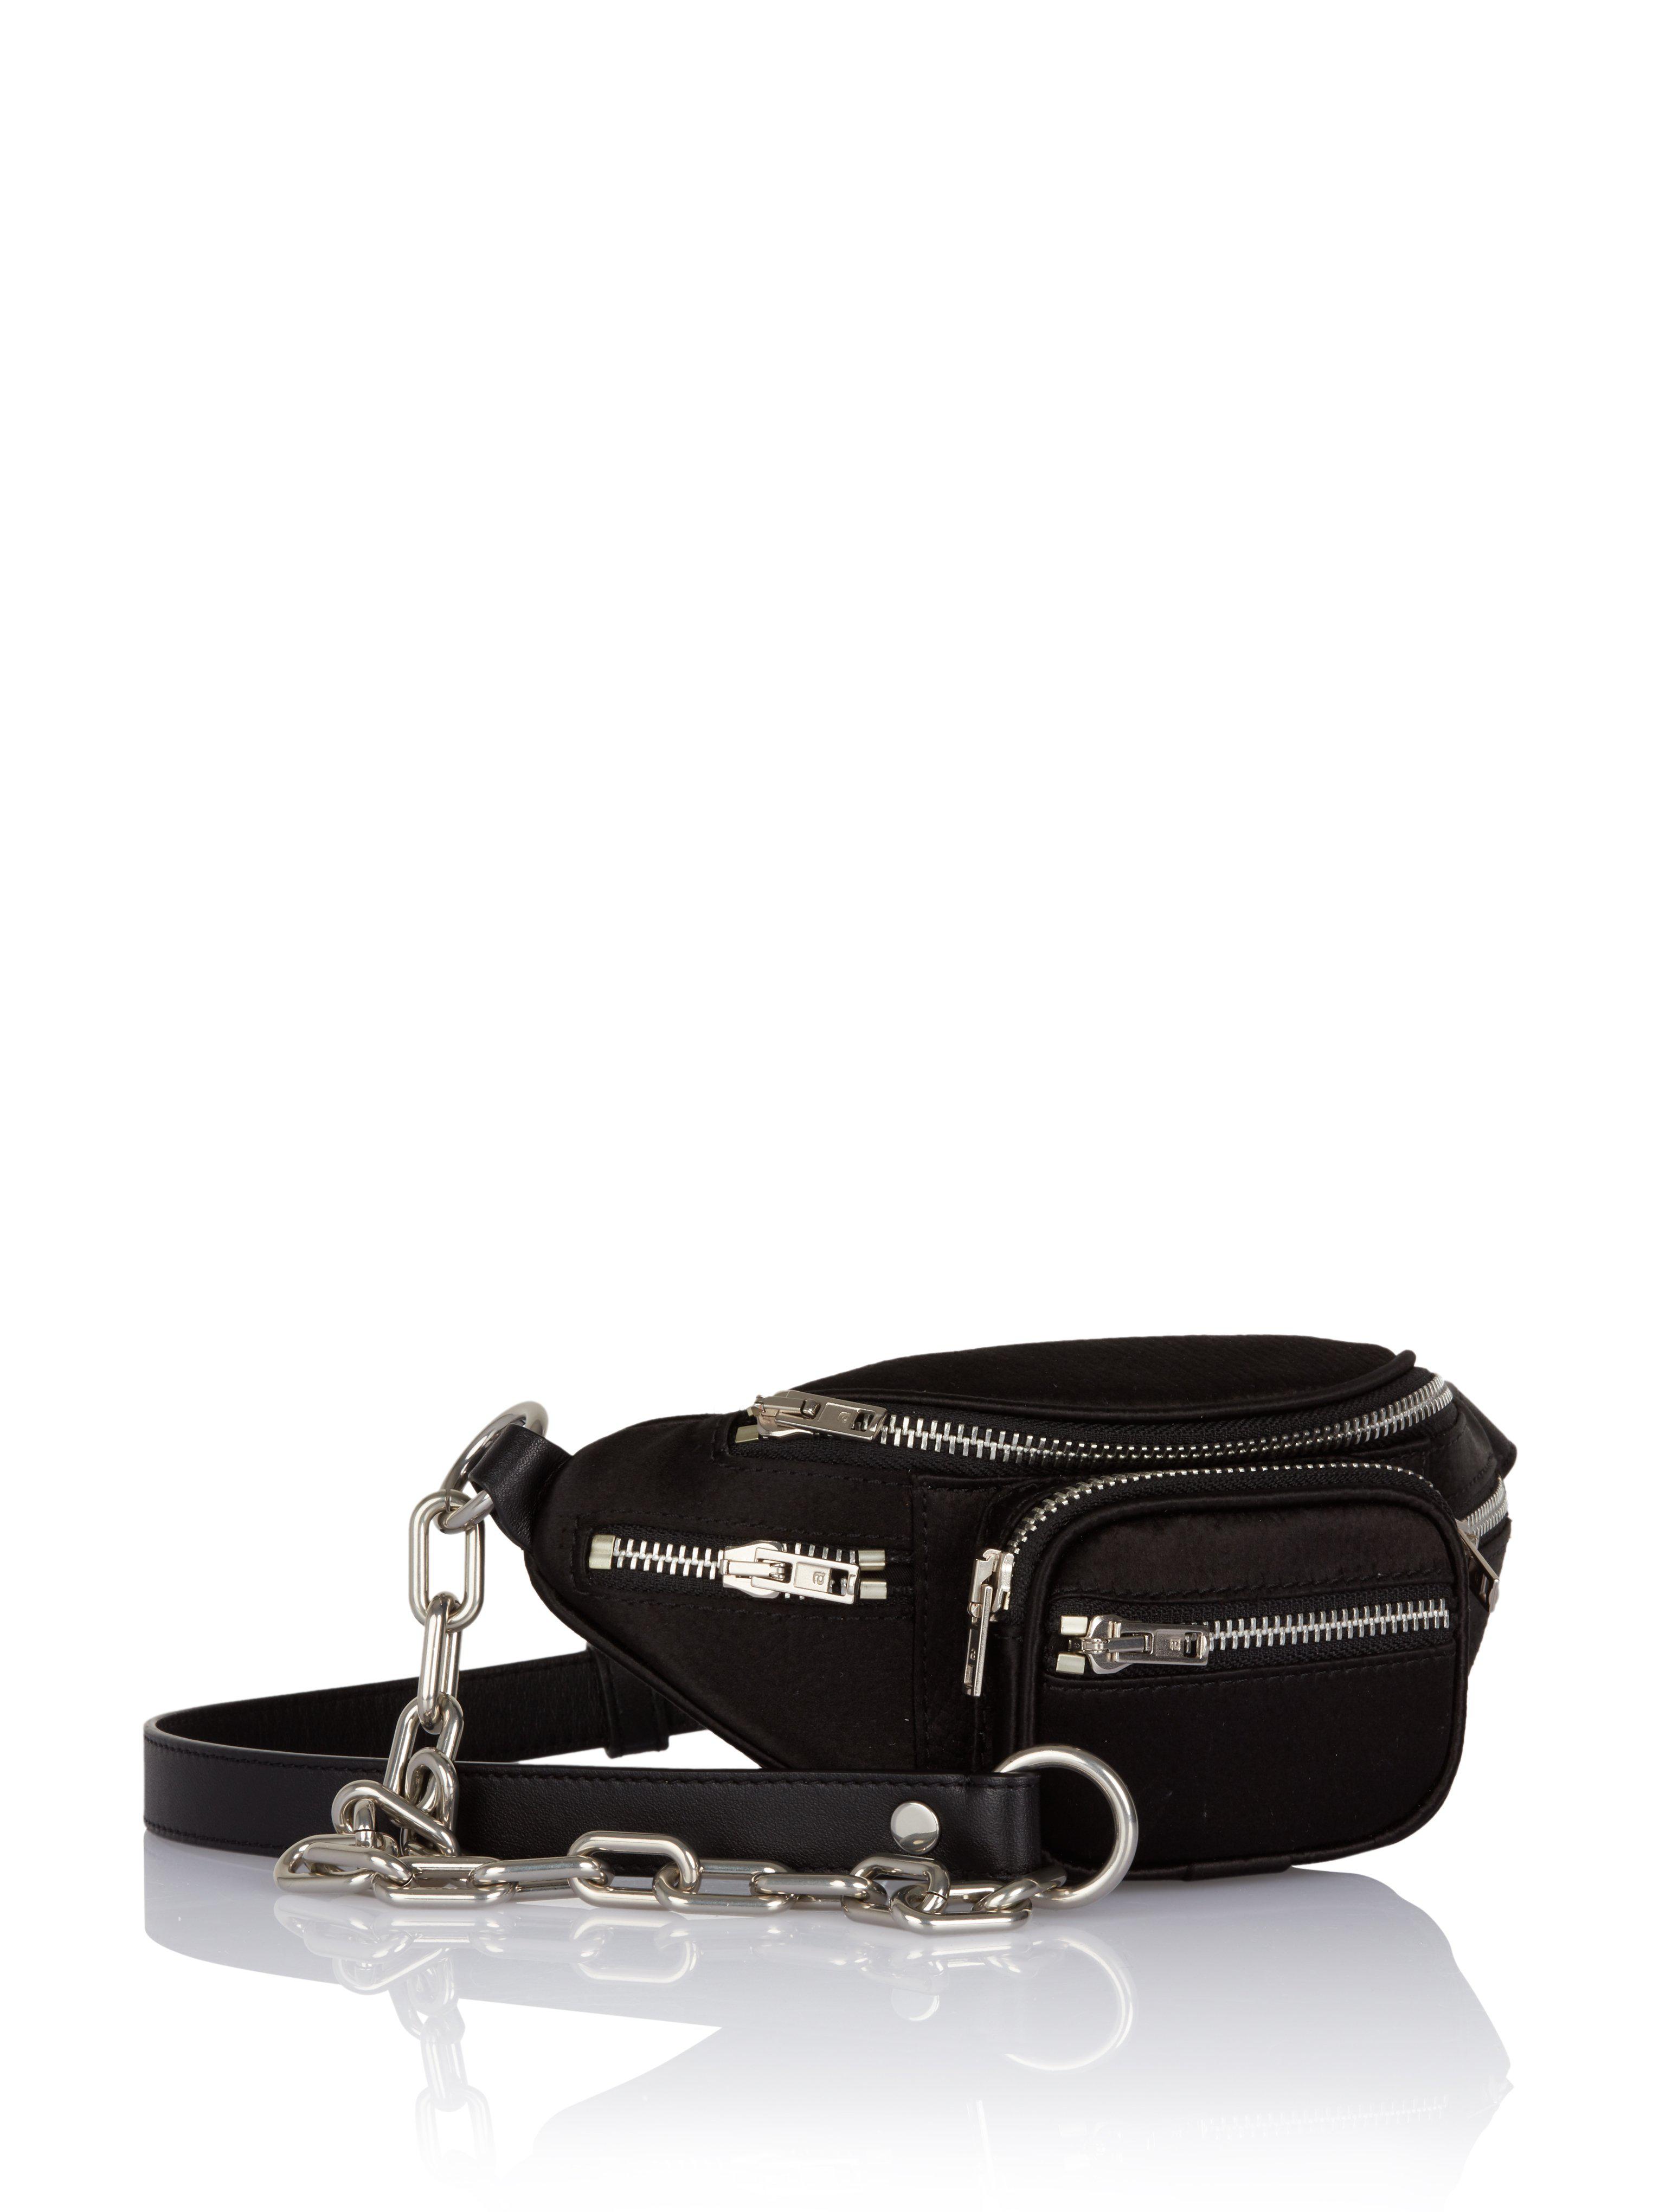 alexander wang attica mini fanny pack > Up to 68% OFF > Free shipping